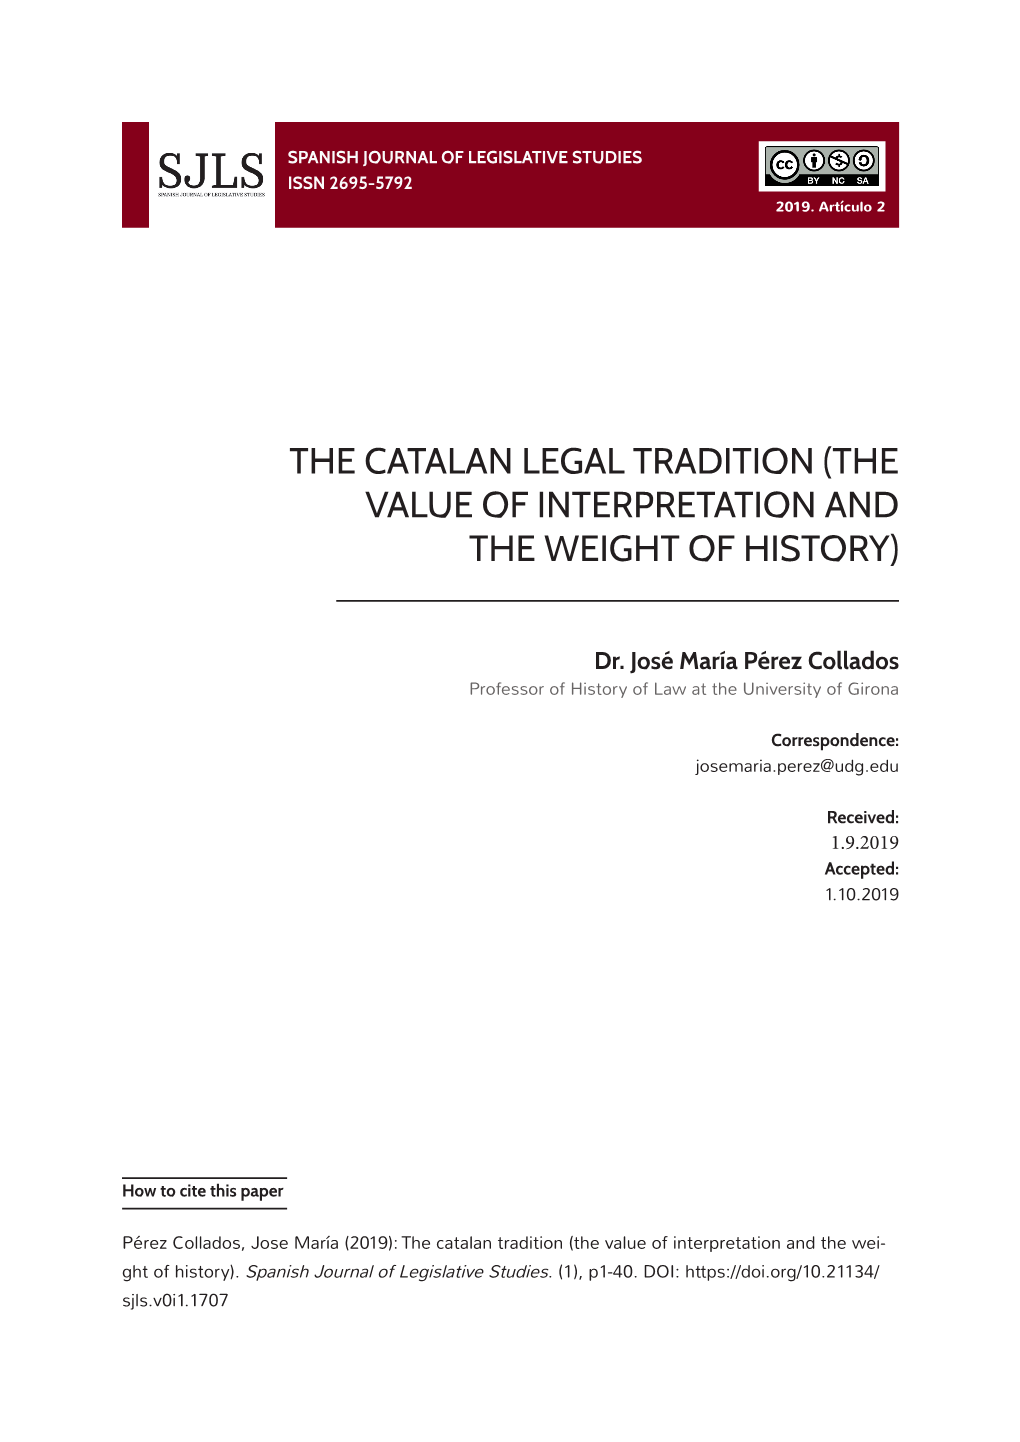 The Catalan Legal Tradition (The Value of Interpretation and the Weight of History)